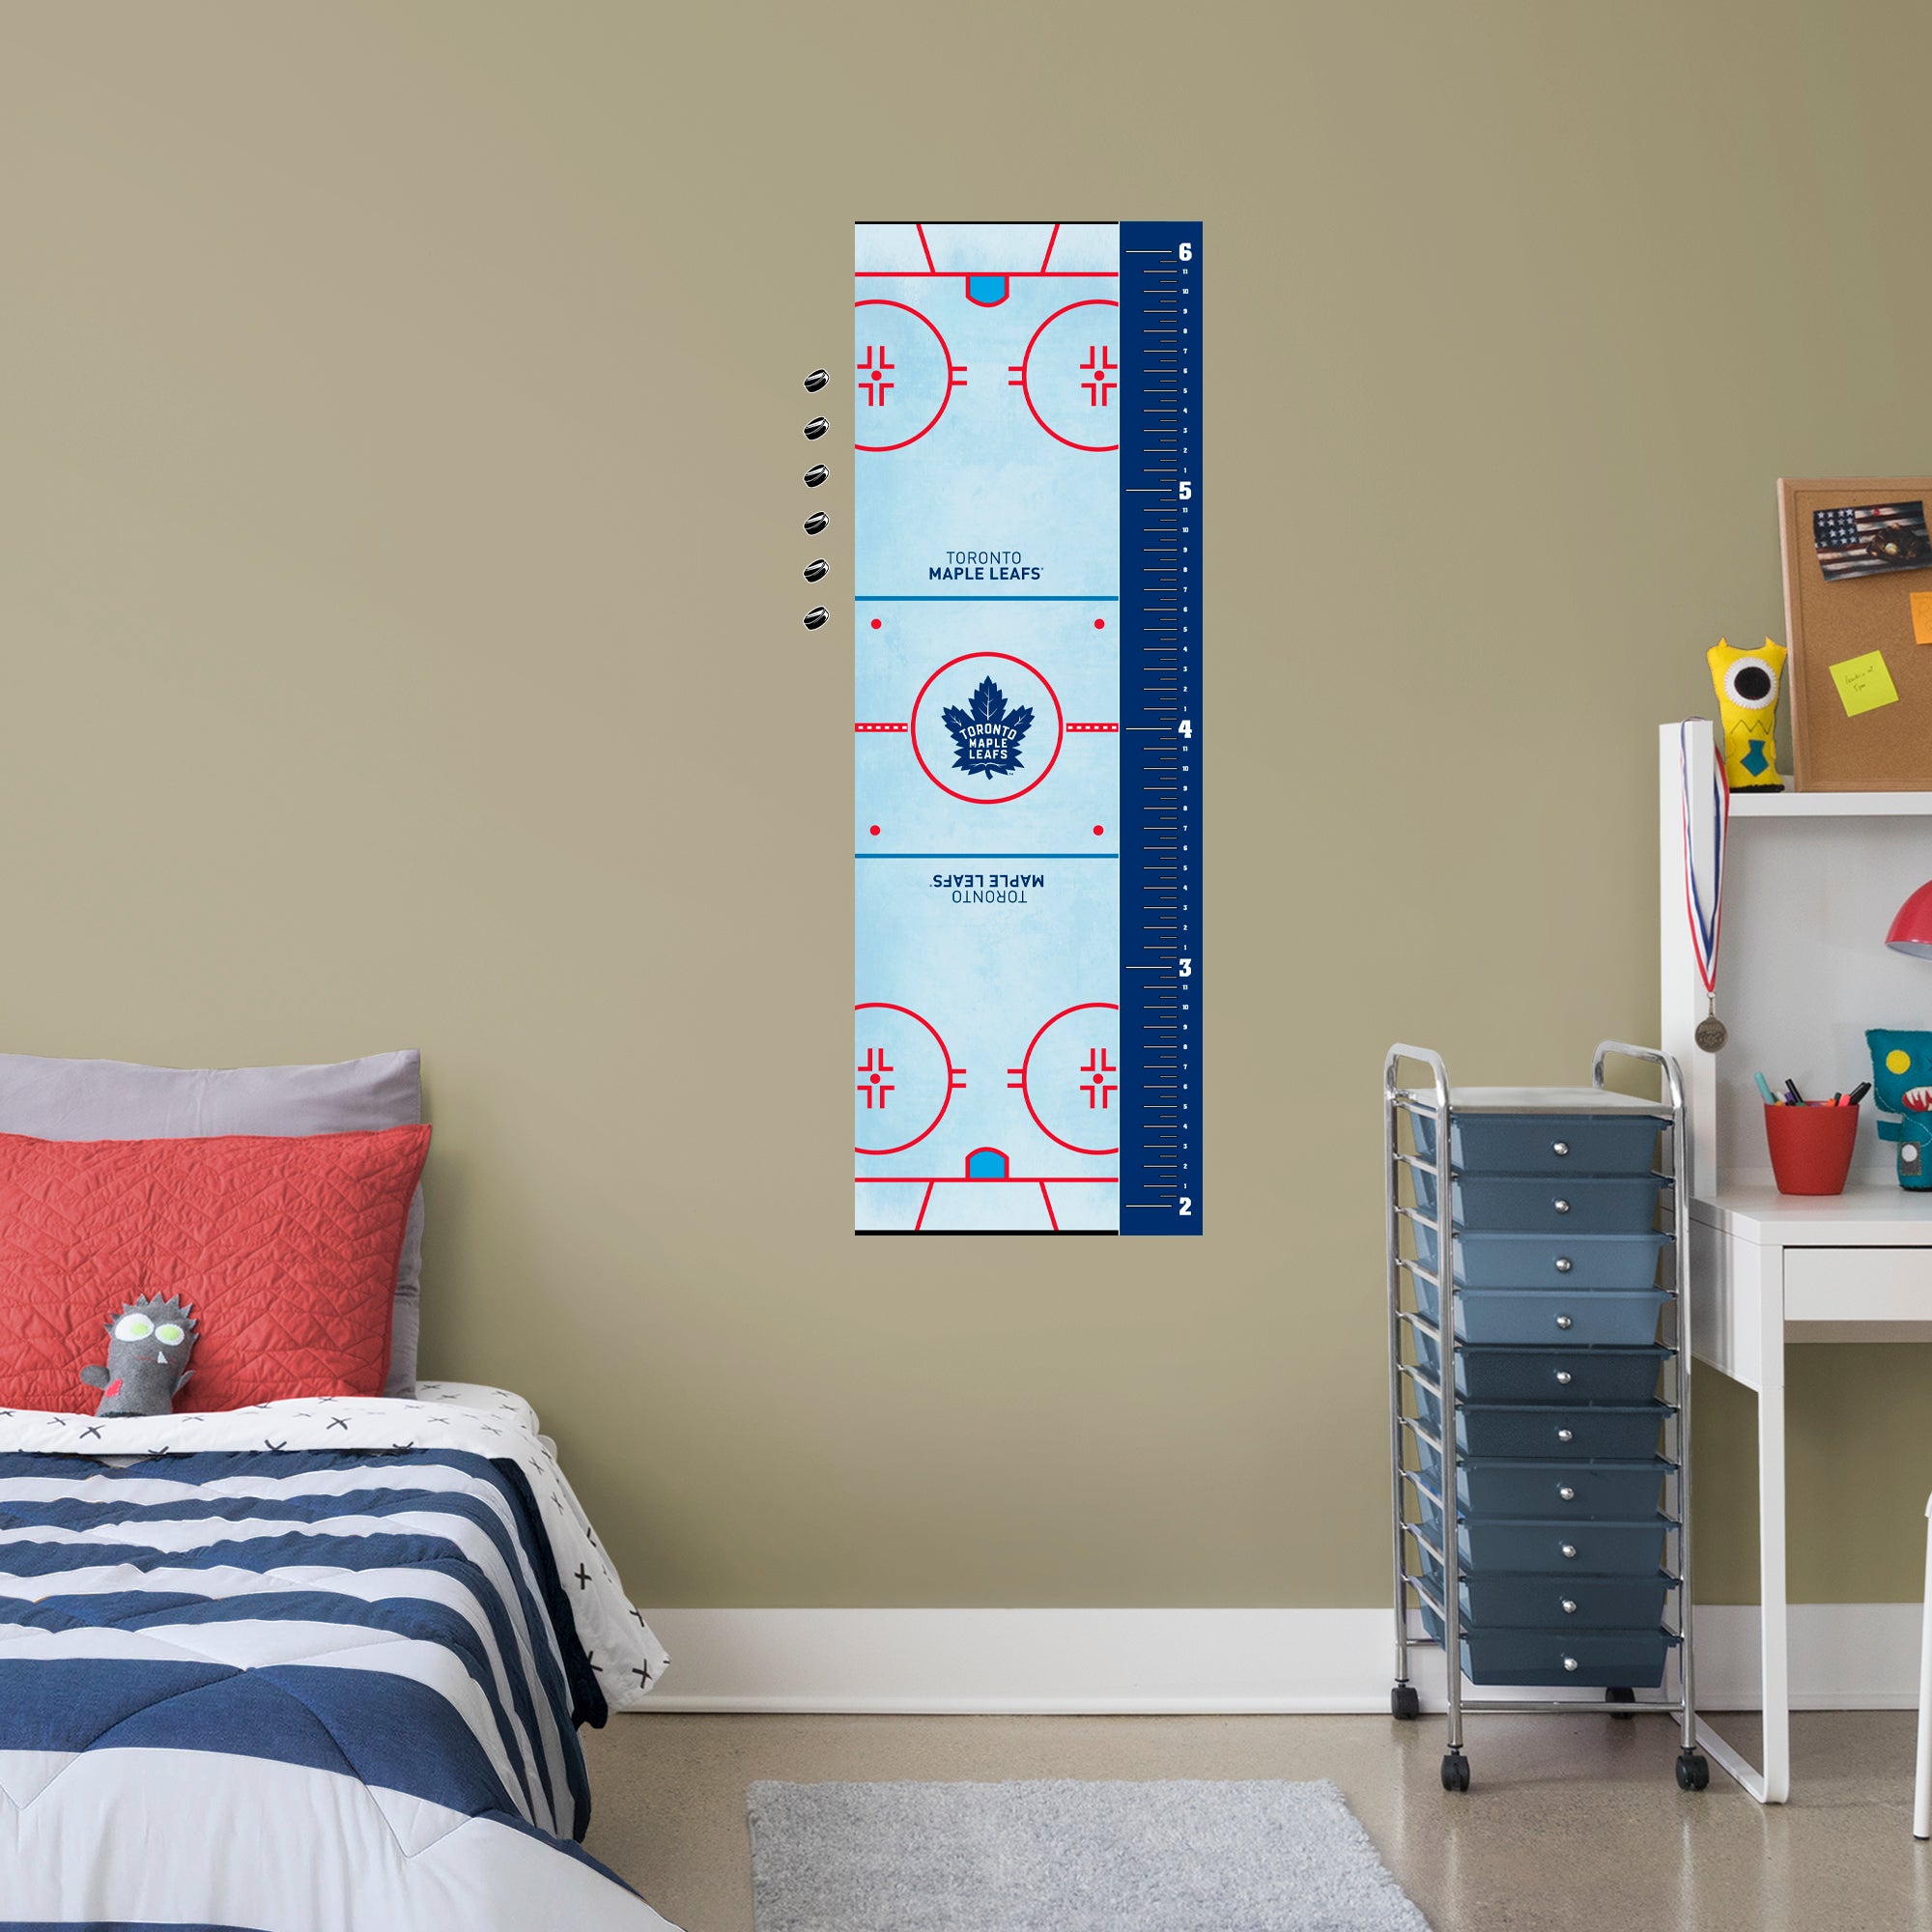 Toronto Maple Leafs: Rink Growth Chart - Officially Licensed NHL Removable Wall Graphic Large by Fathead | Vinyl